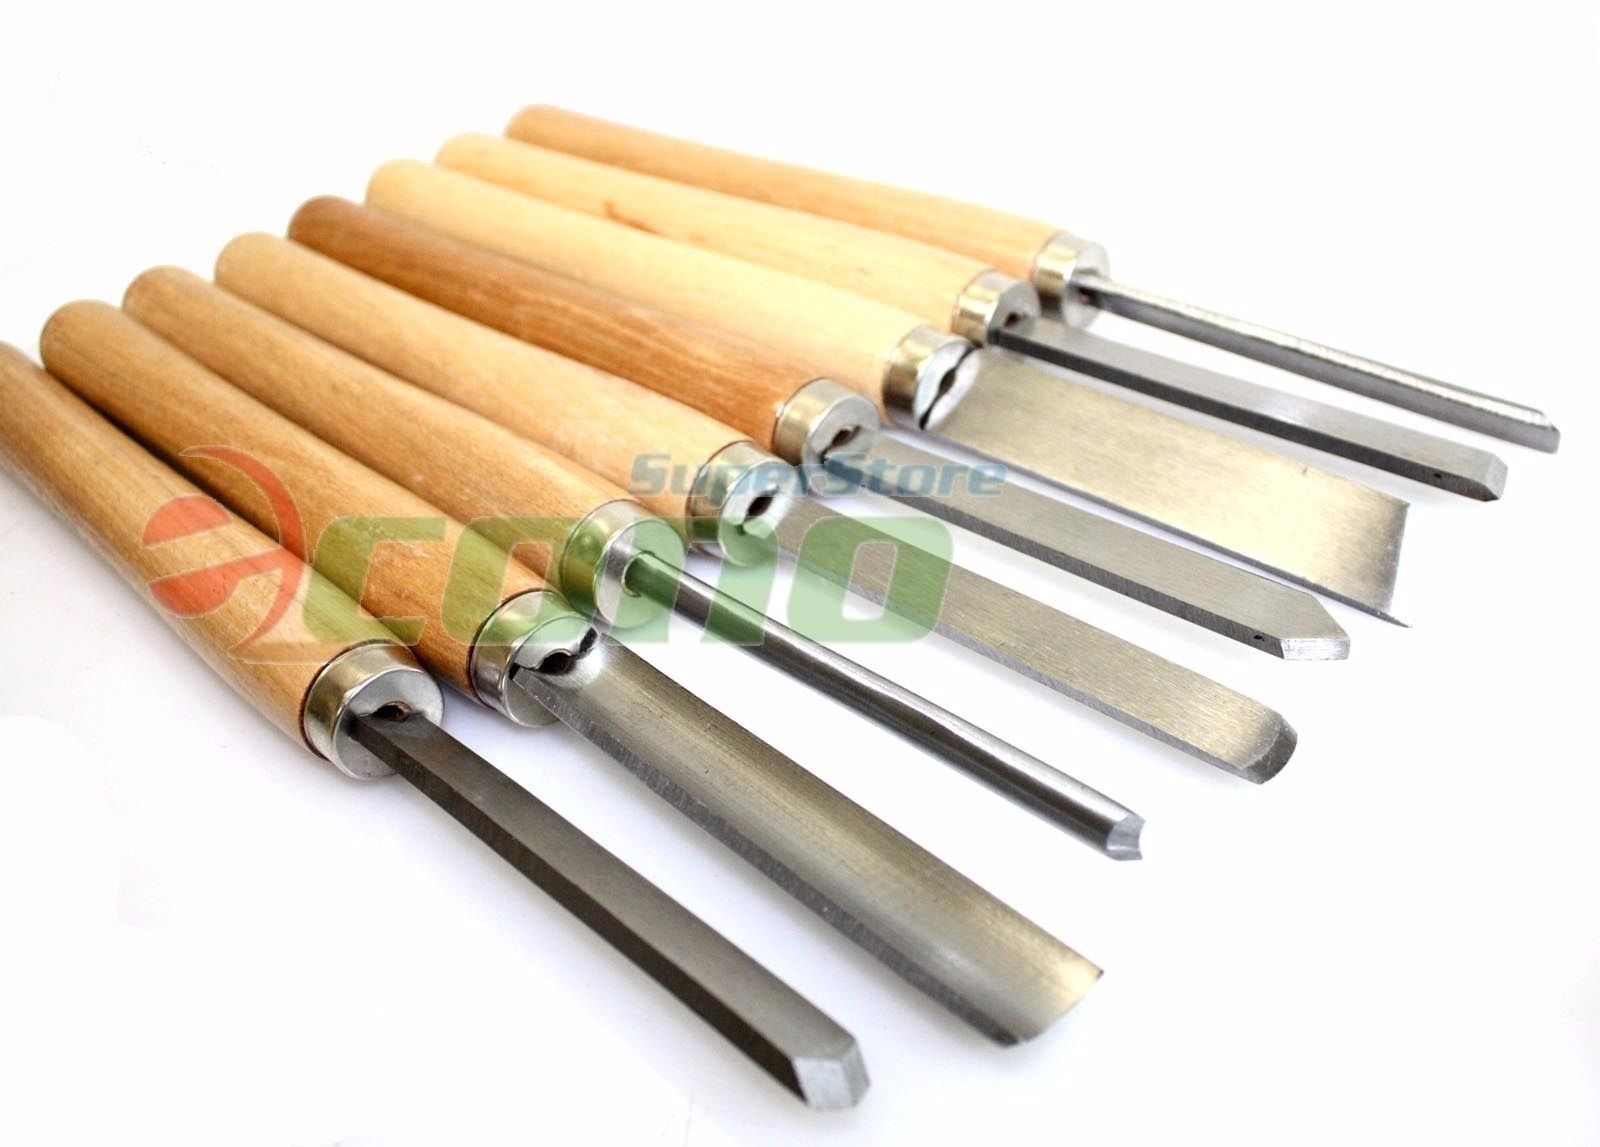 8pc Wood Lathe Chisel Turning Tool set Woodworking Gouge Skew Parting Spearpoint